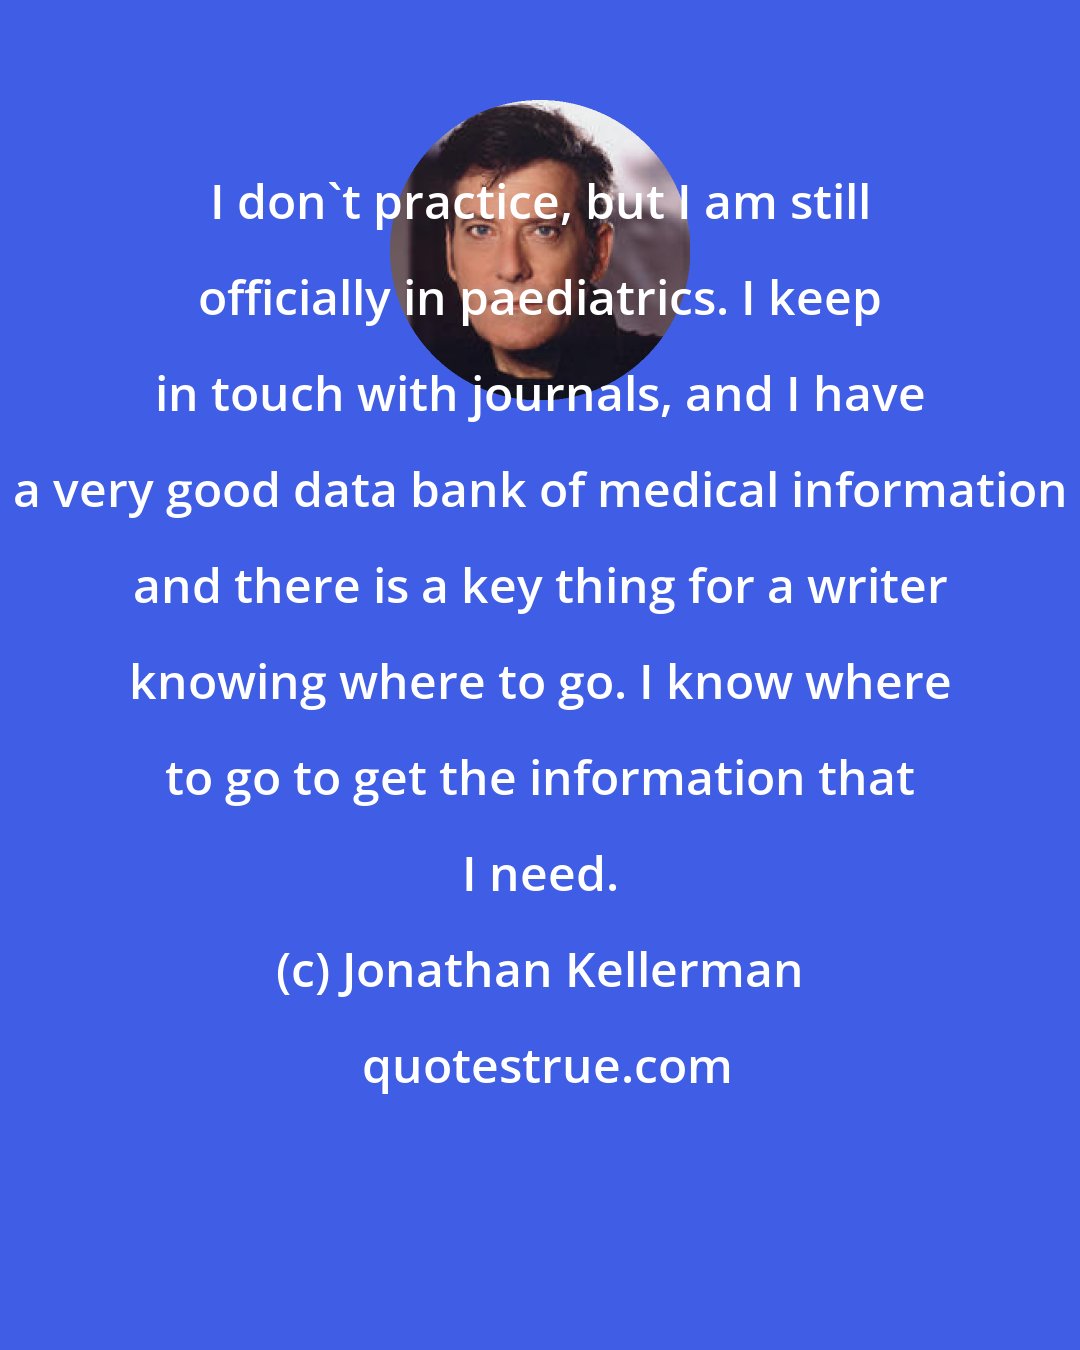 Jonathan Kellerman: I don't practice, but I am still officially in paediatrics. I keep in touch with journals, and I have a very good data bank of medical information and there is a key thing for a writer knowing where to go. I know where to go to get the information that I need.